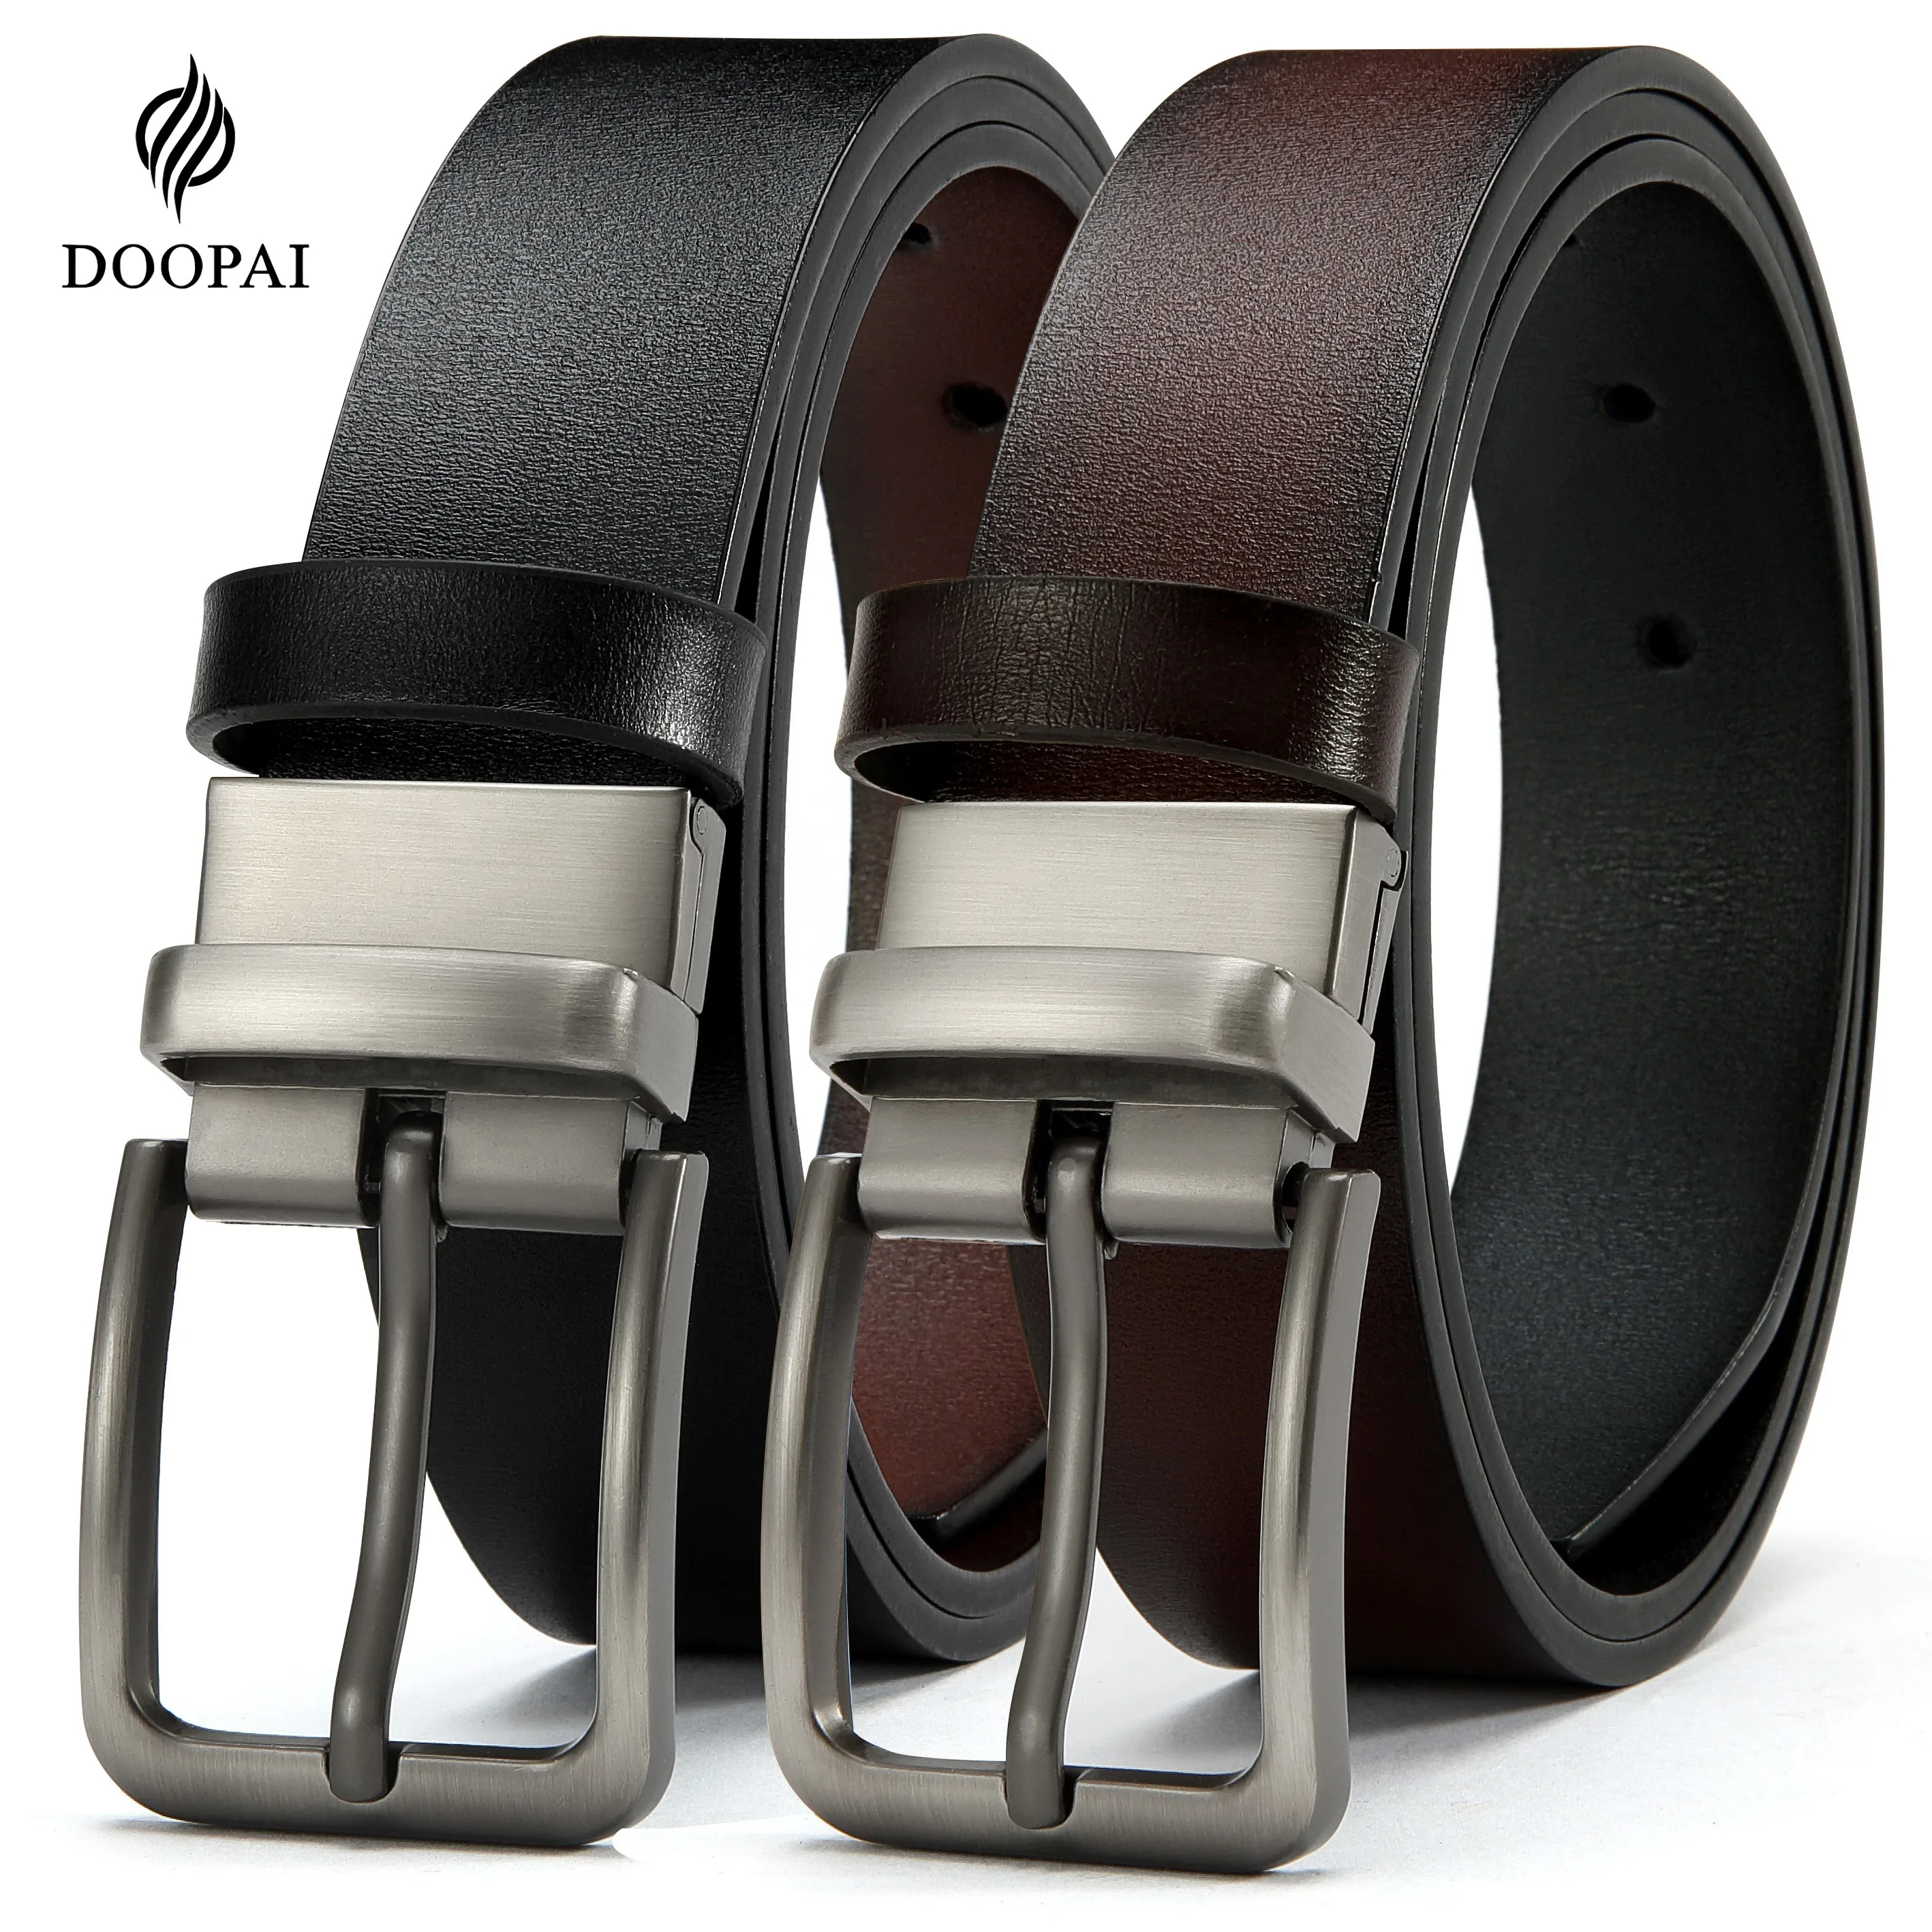 Mens Leather Pin Buckle Belt High Quality Leather Belt Genuine Leather Jeans Cowskin Casual Belts Business Cowboy Waistband Male